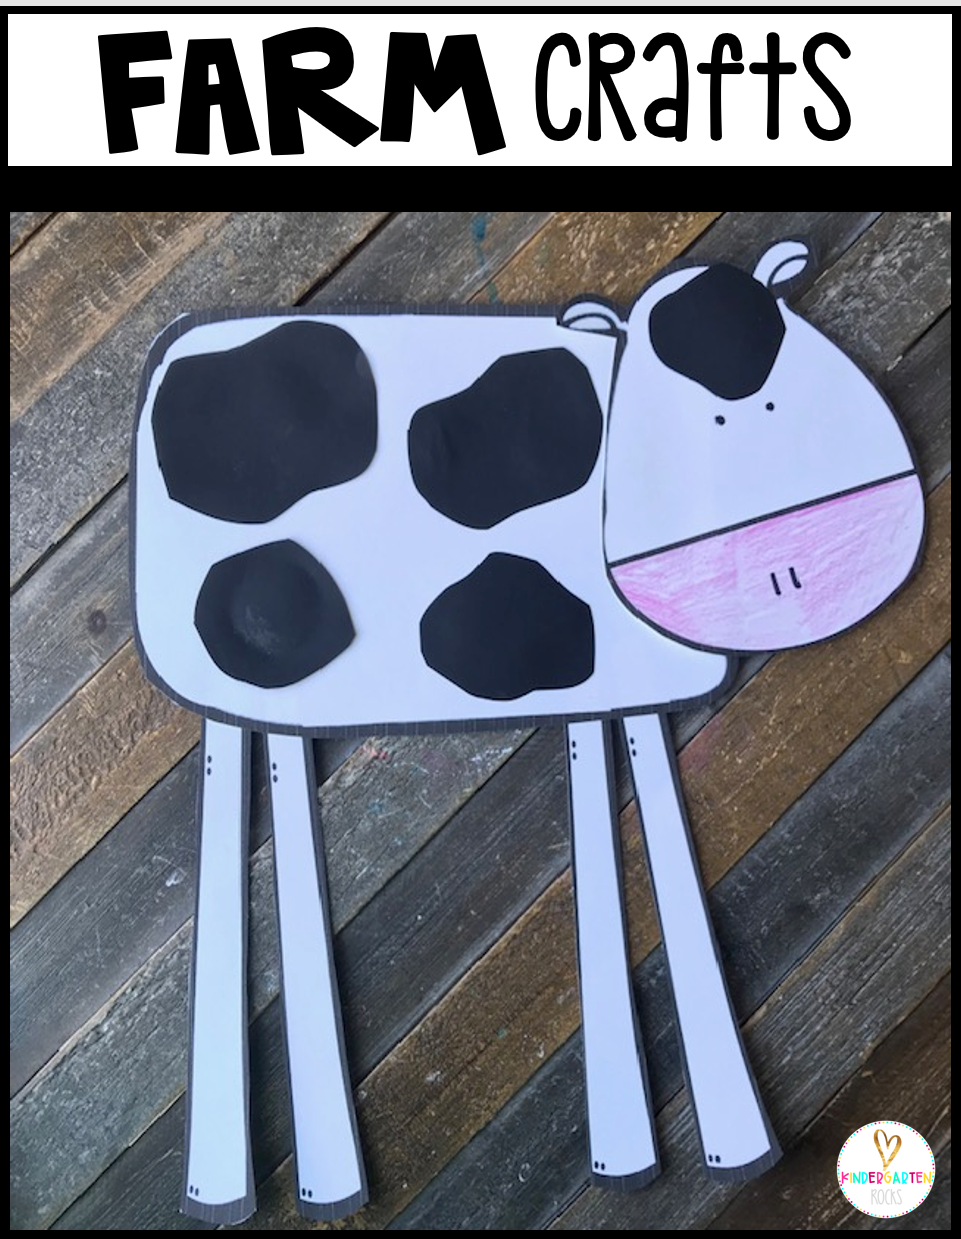 Are you looking for a fun age appropriate crafts for kids?  Then you will love Farm Crafts.  This unit is perfect for your farm tale unit at any time throughout the year.  Increase student vocabulary and readiness skills with hands on crafts.